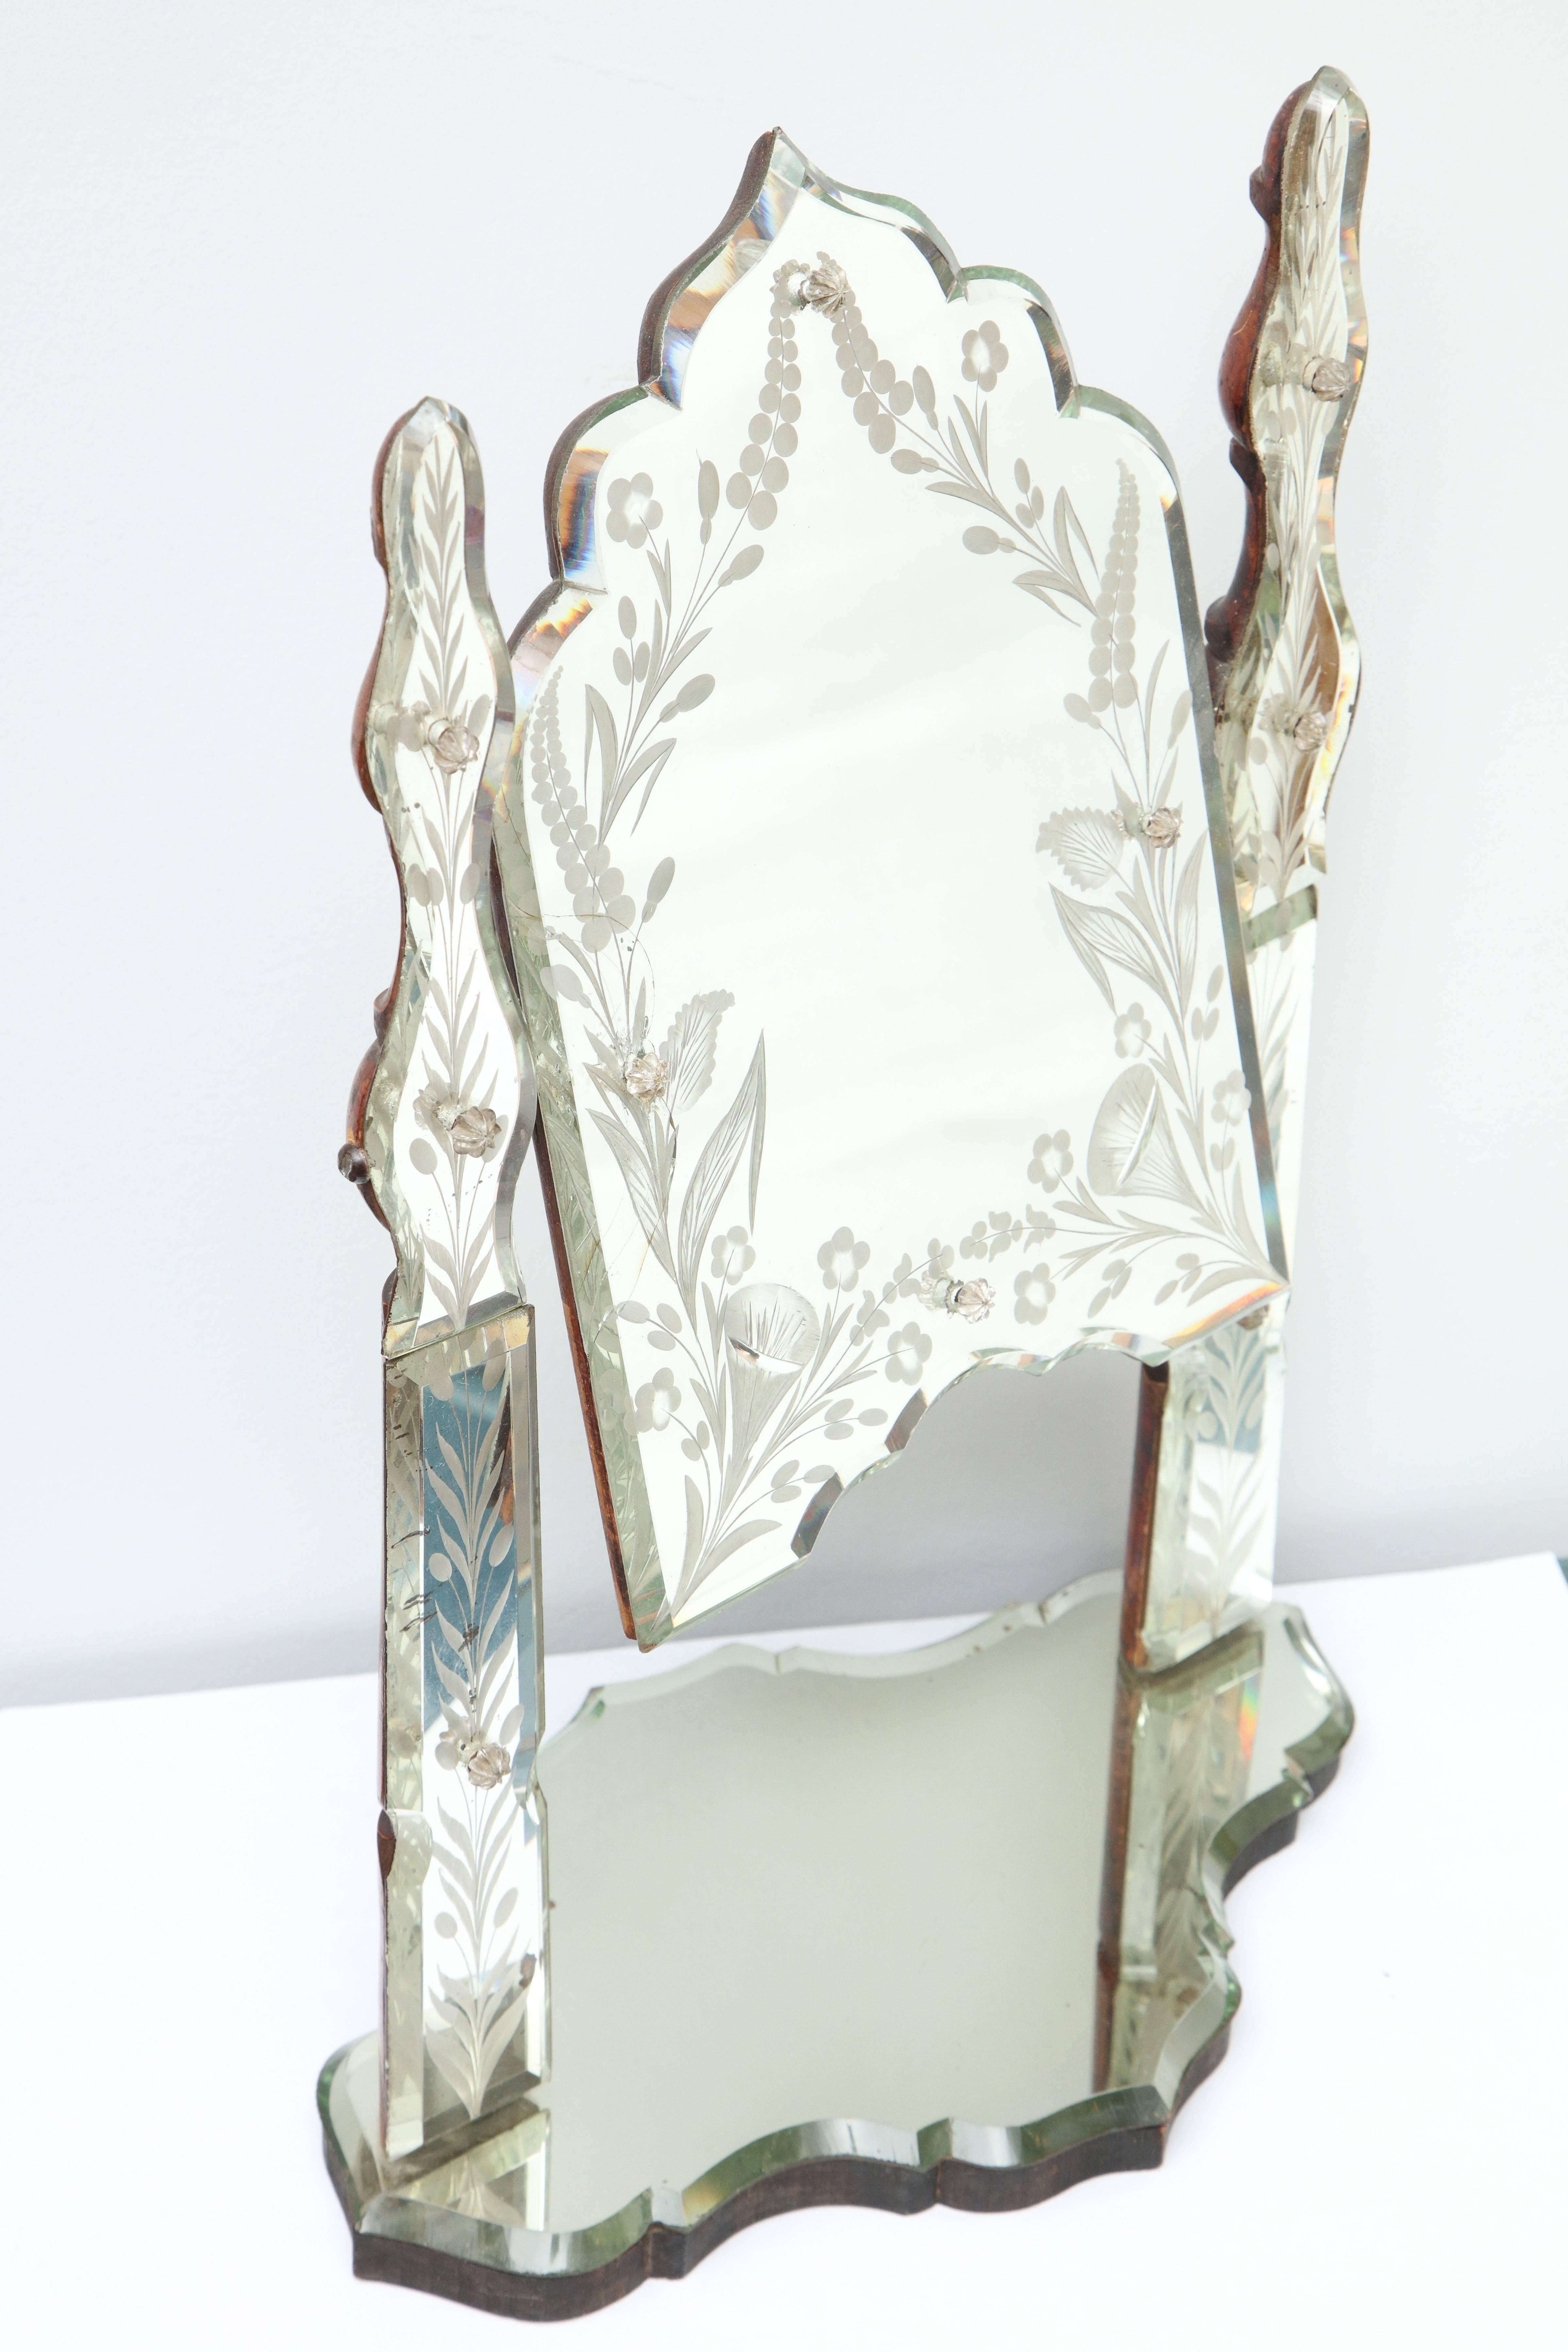 A wonderfully etched and bevelled mirror on a moveable/tilt stand.
This is a very unusual piece to find and enhances  any vanity or table.